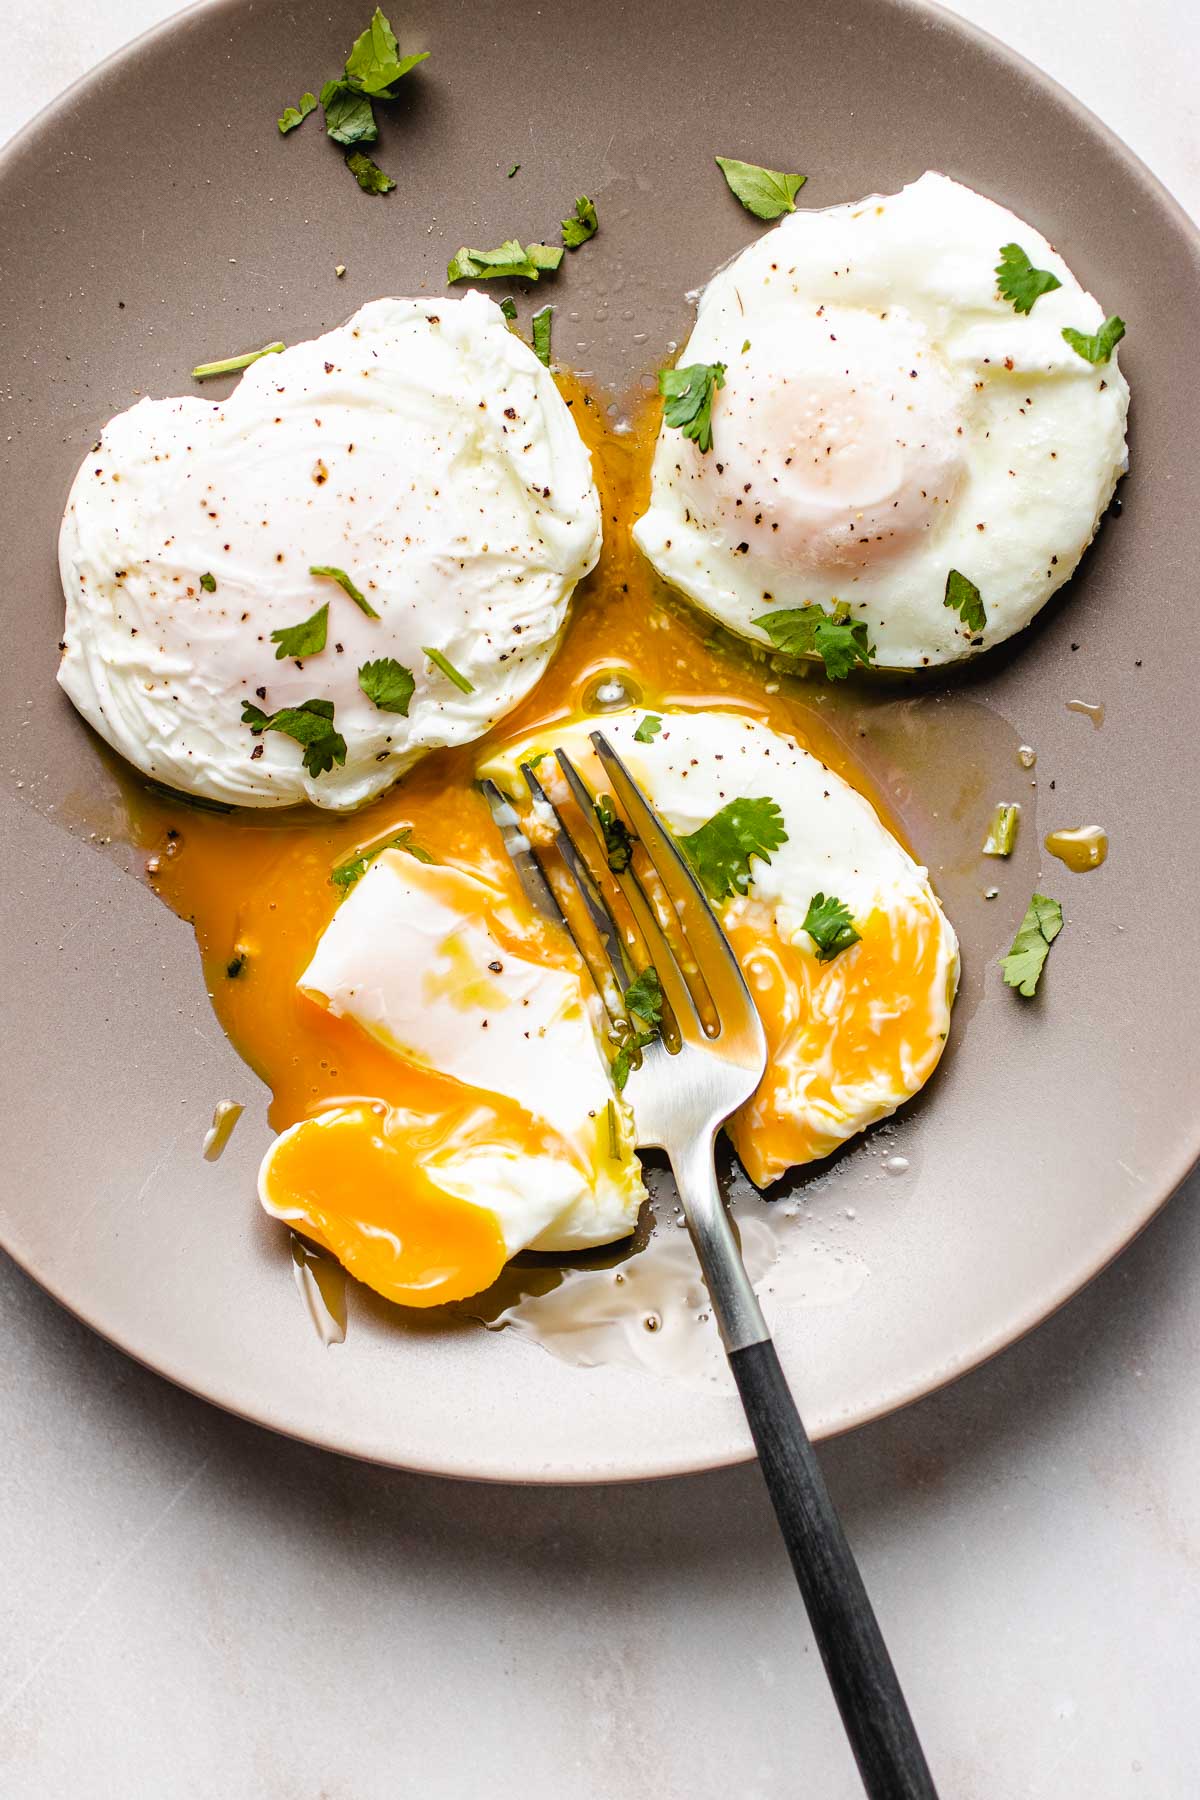 https://iheartumami.com/wp-content/uploads/2023/05/Air-fryer-poached-eggs.jpg